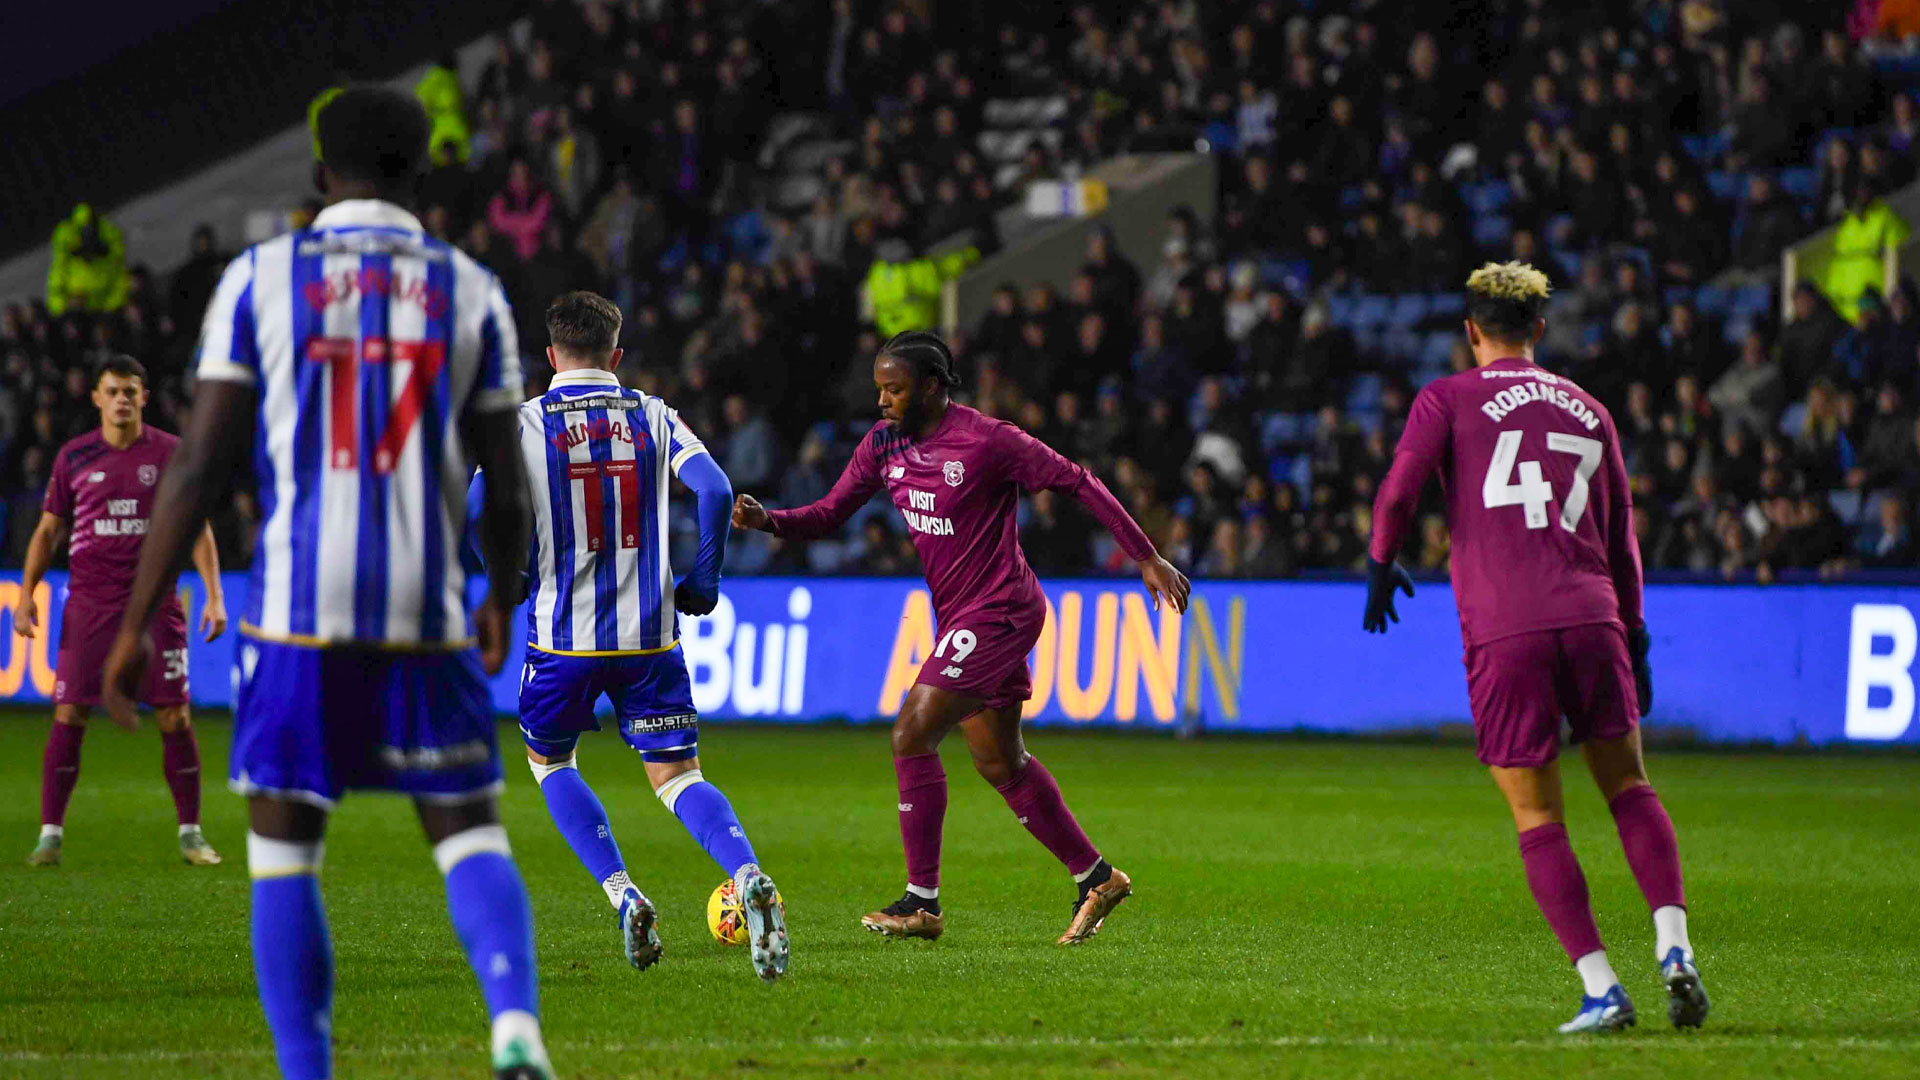 Romaine Sawyers in action for Cardiff City